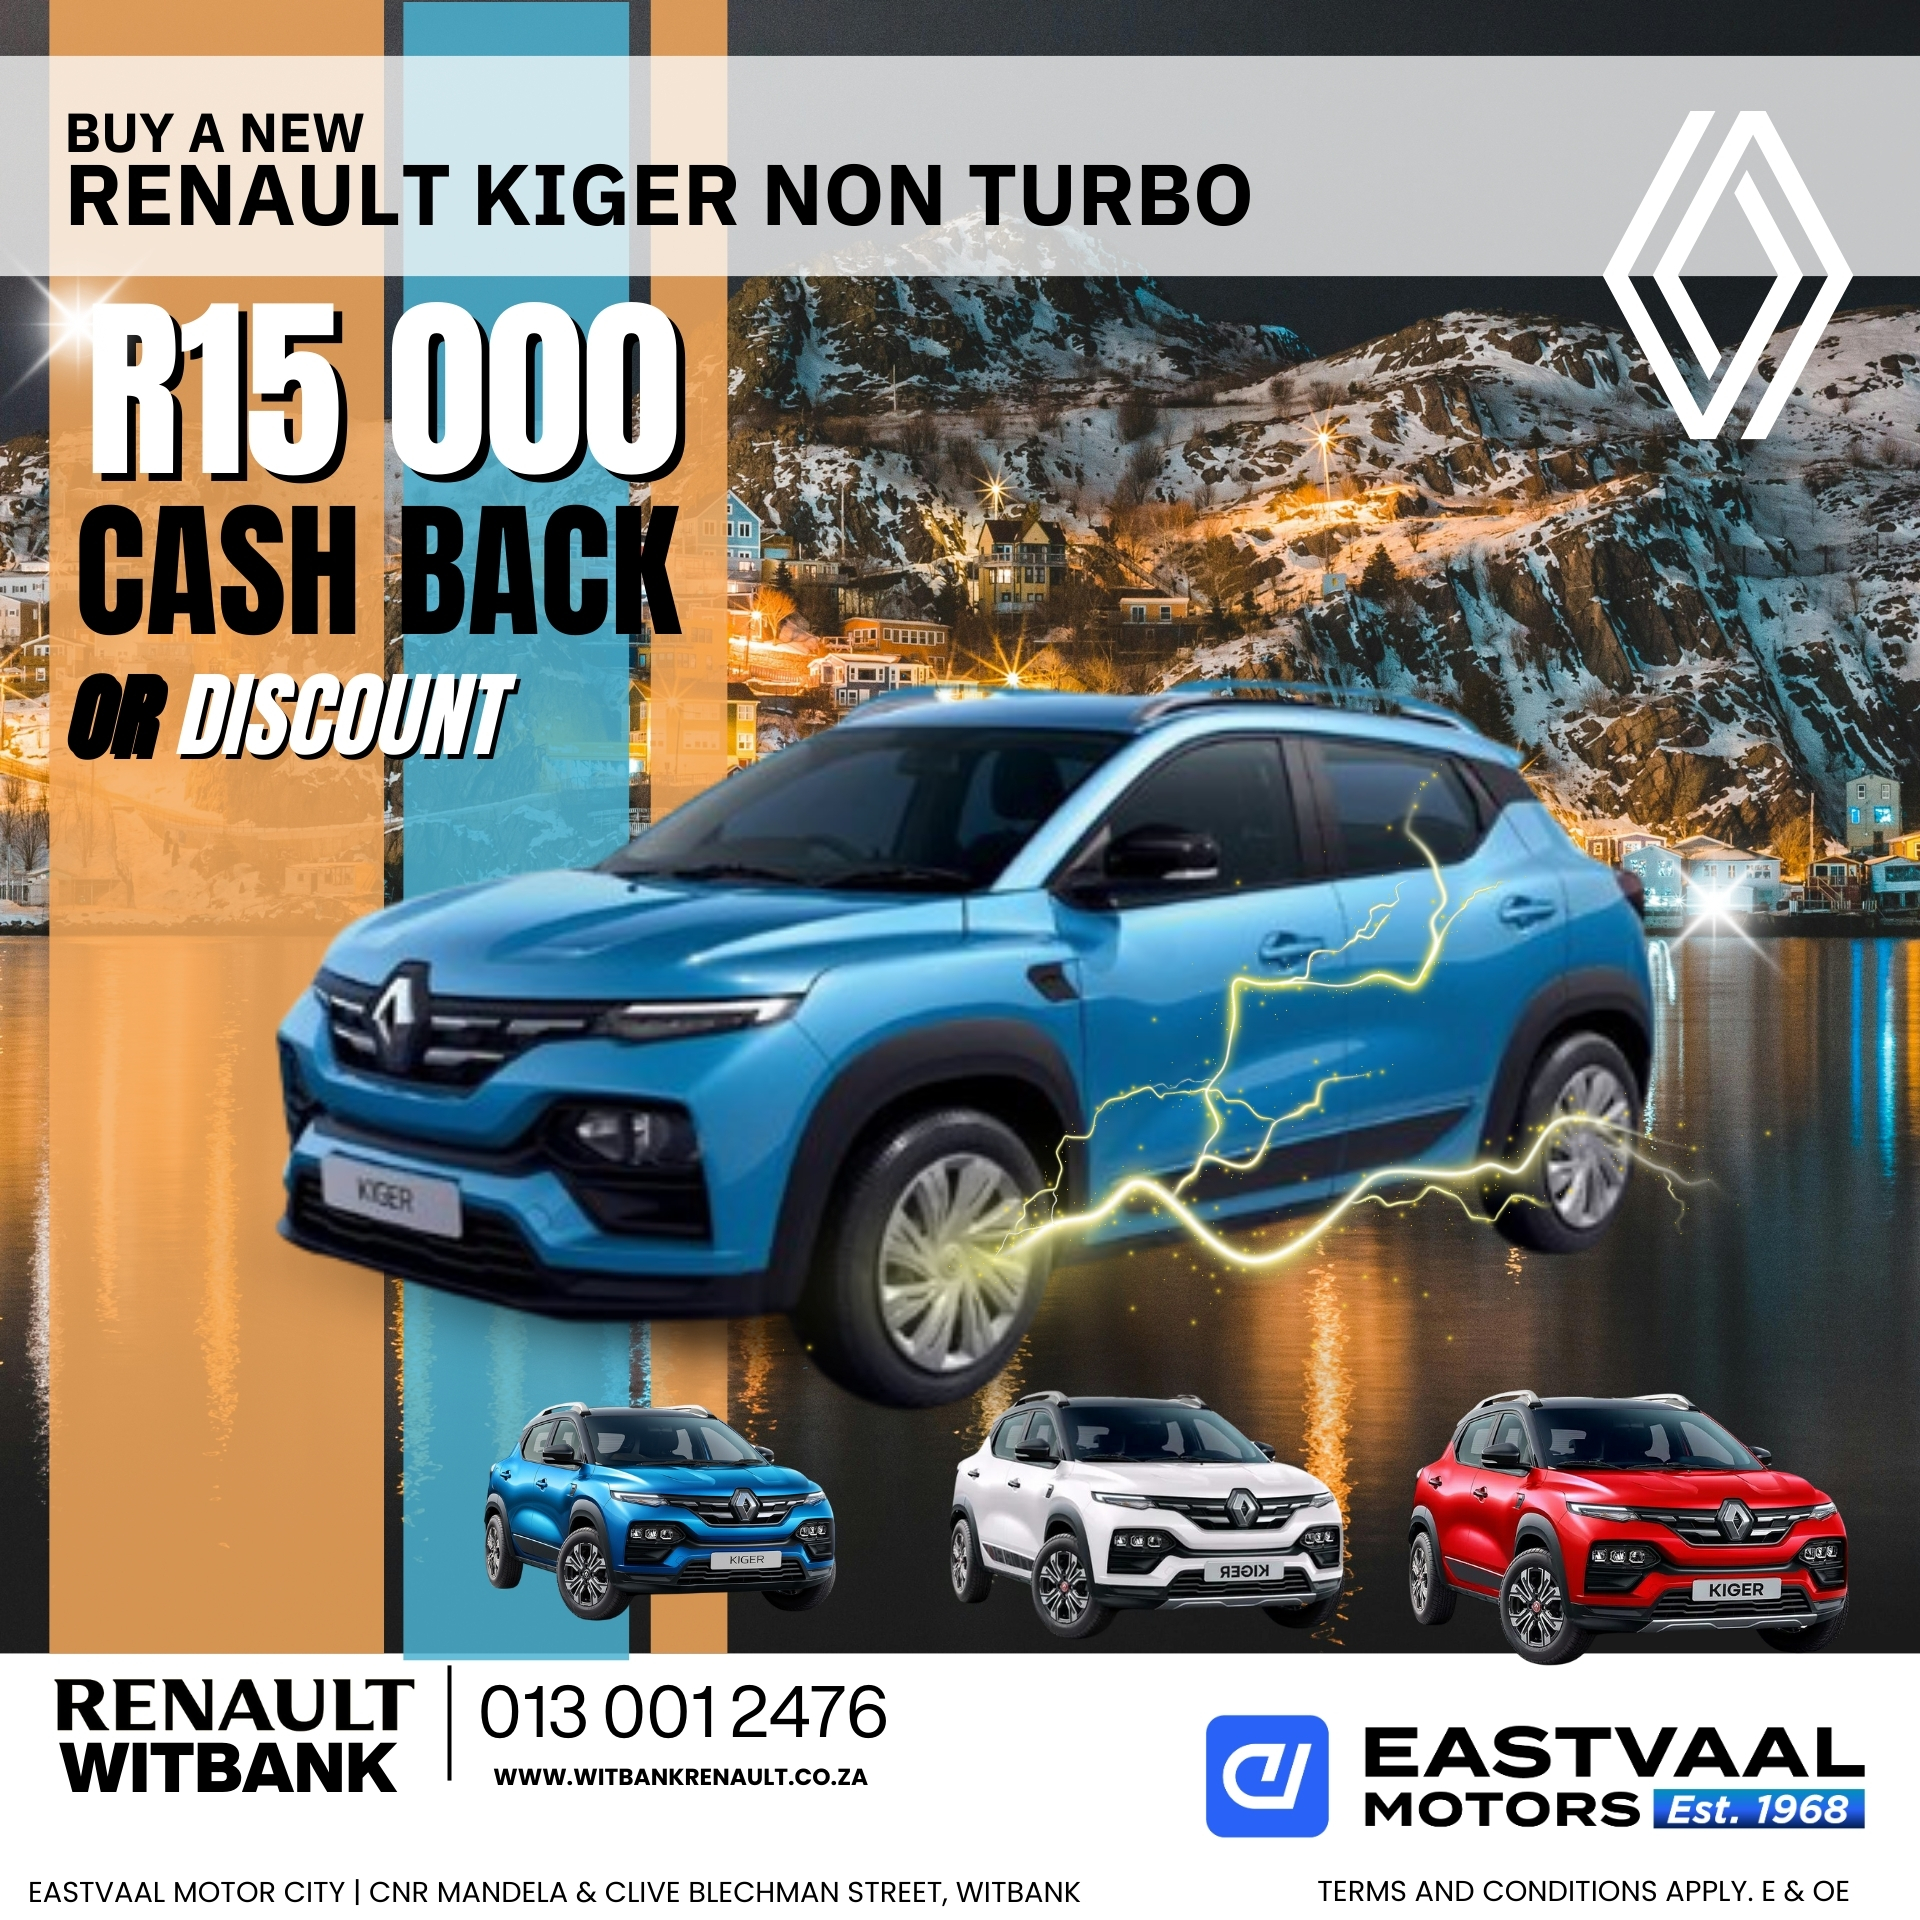 Step into luxury and performance this July with a new Renault from Eastvaal Motor City. image from 